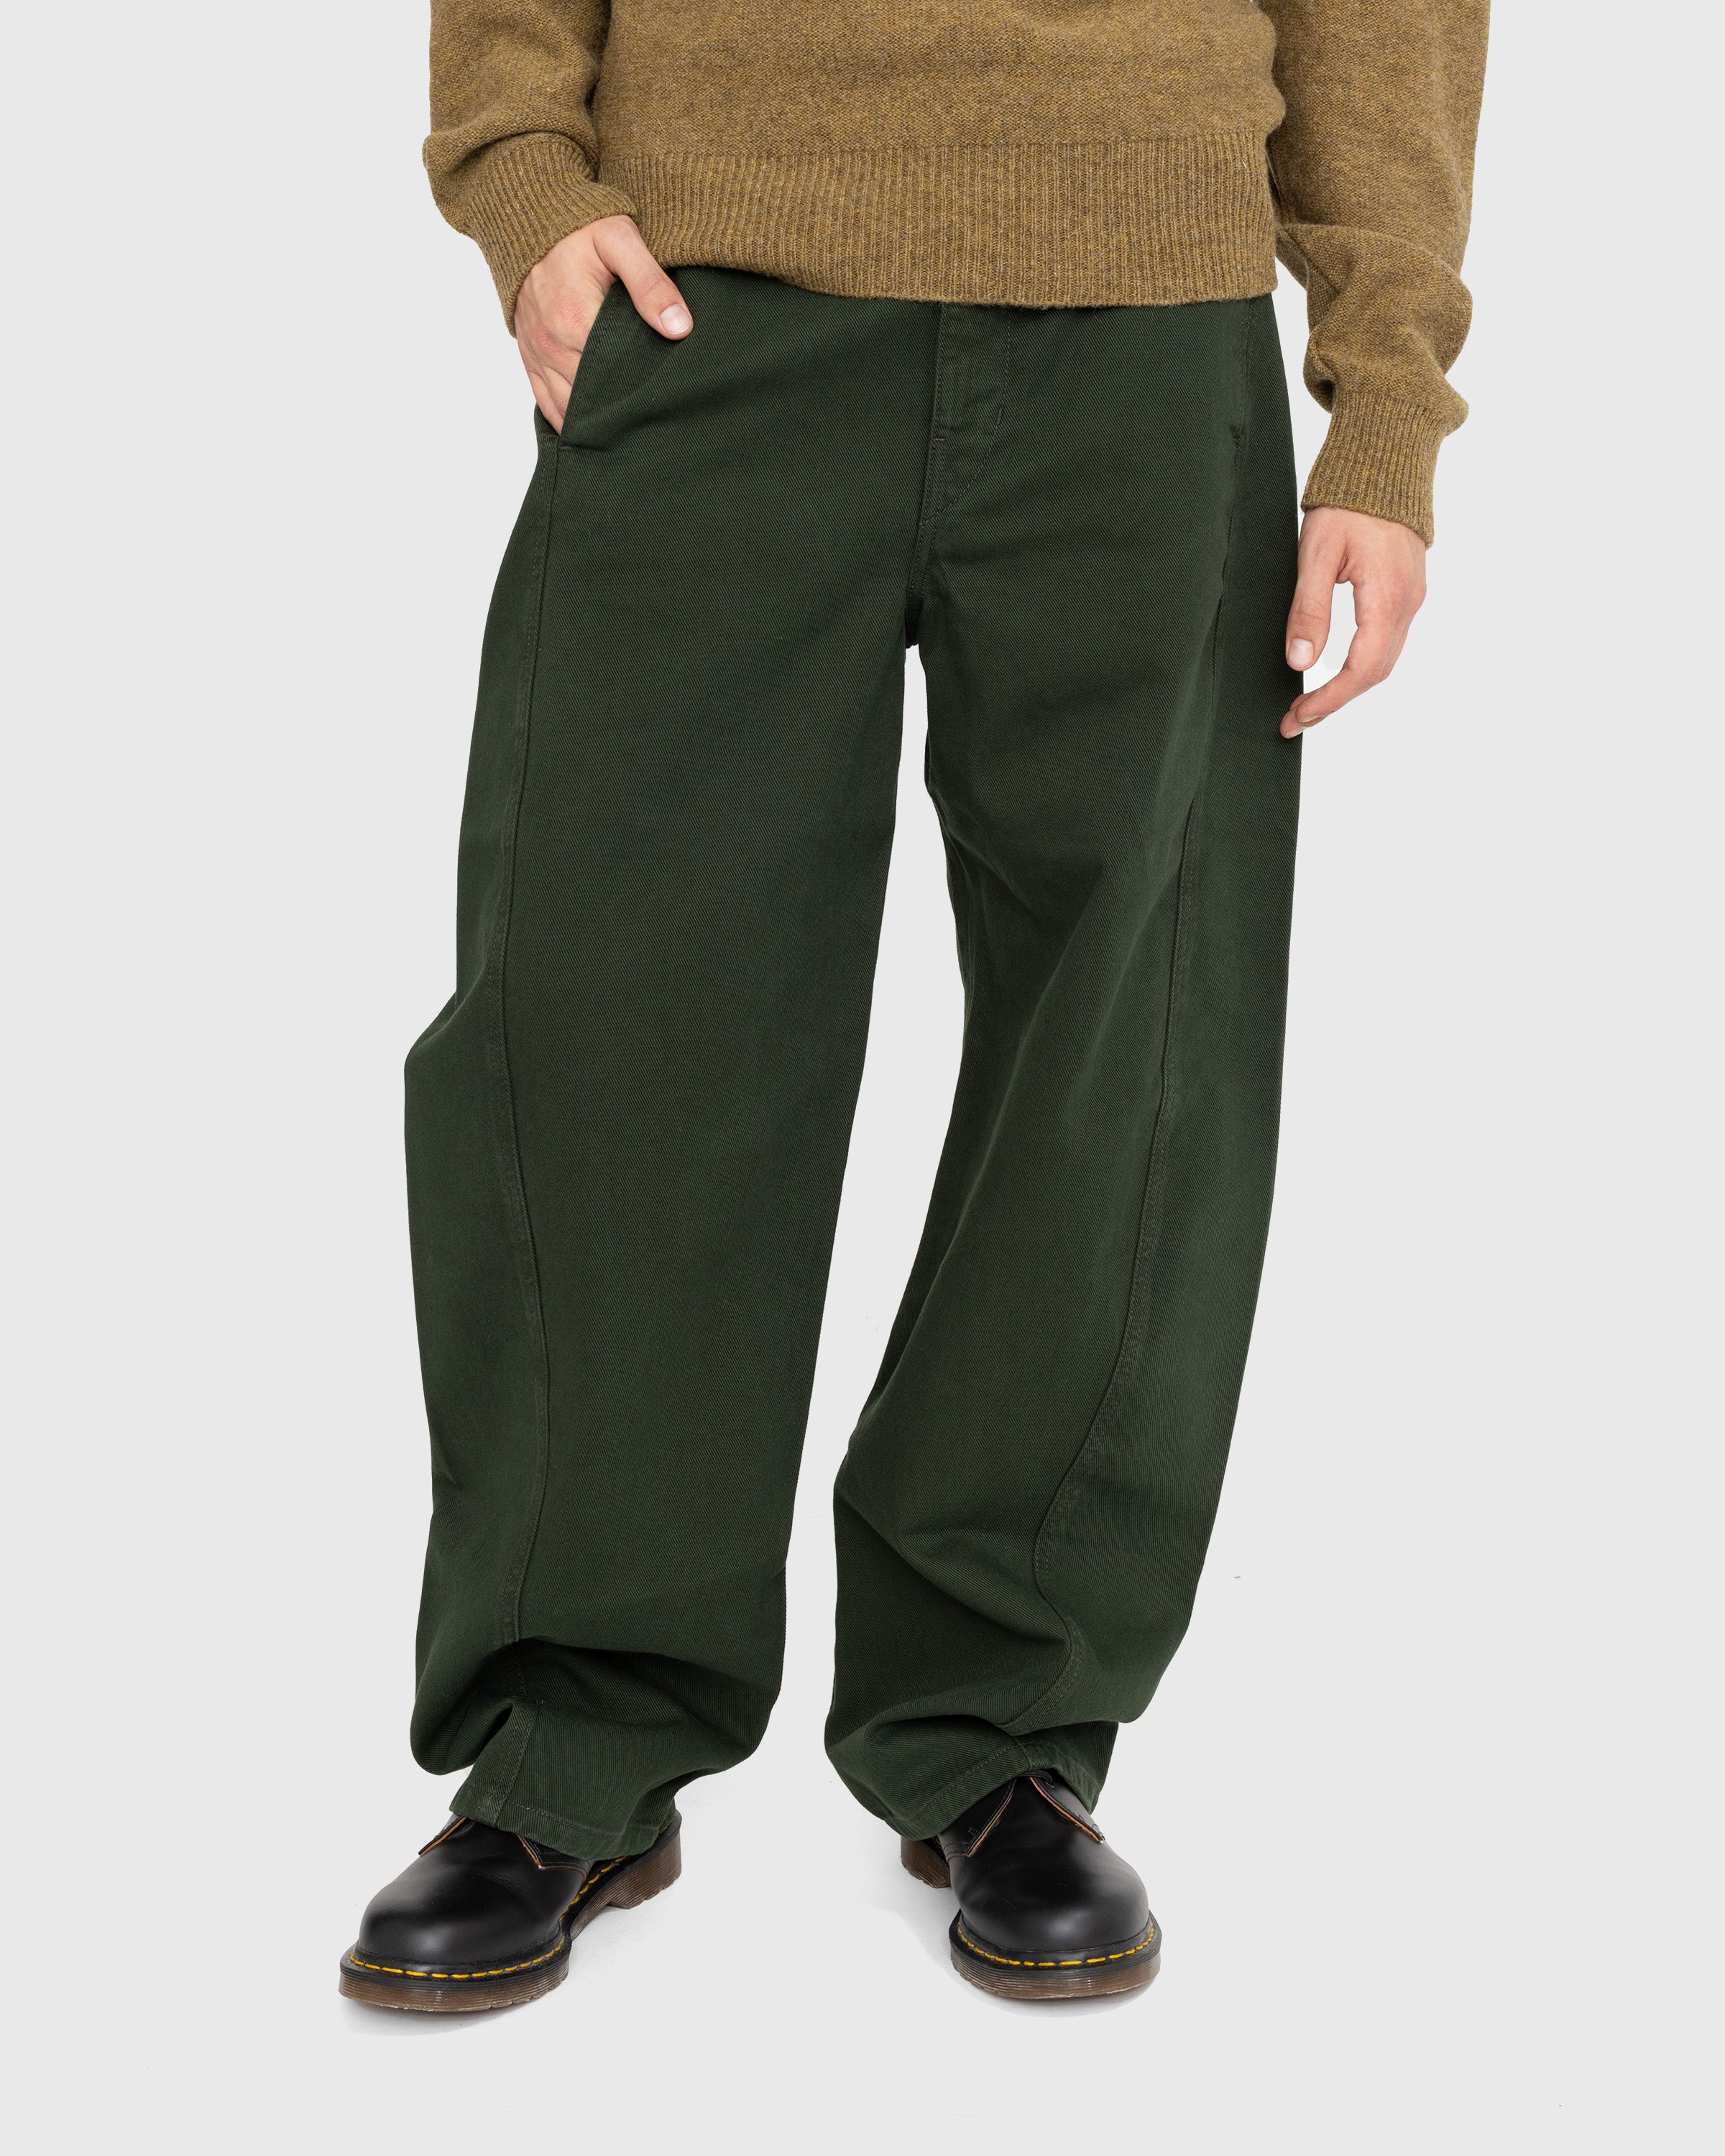 Lemaire - Twisted Belted Pants Green - Clothing - Green - Image 2